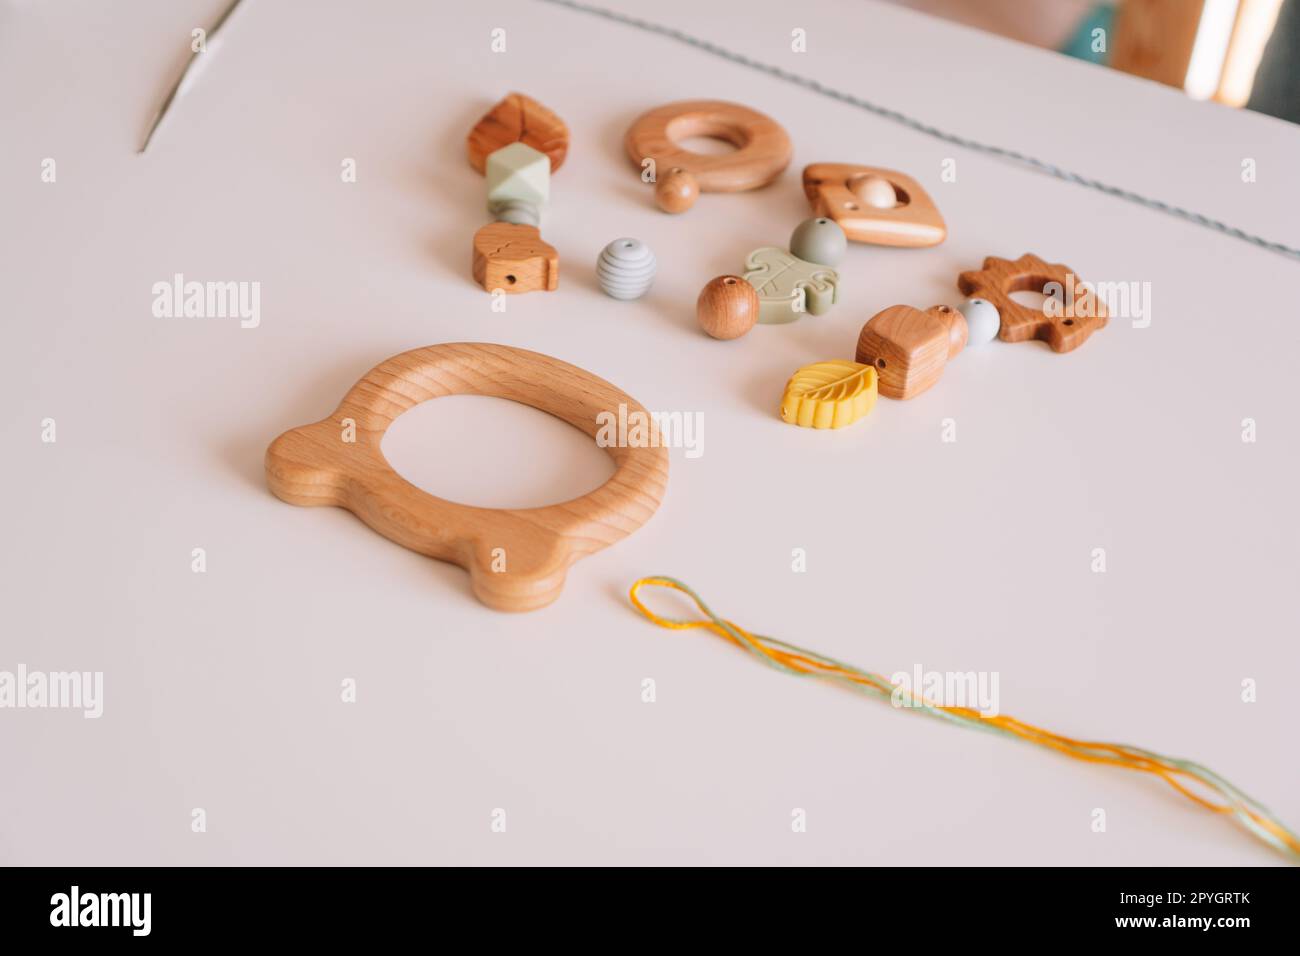 Ecological teether toy for toothache on desk. Natural safe accessories of wood. Haptic healthcare baby pacifiers Stock Photo